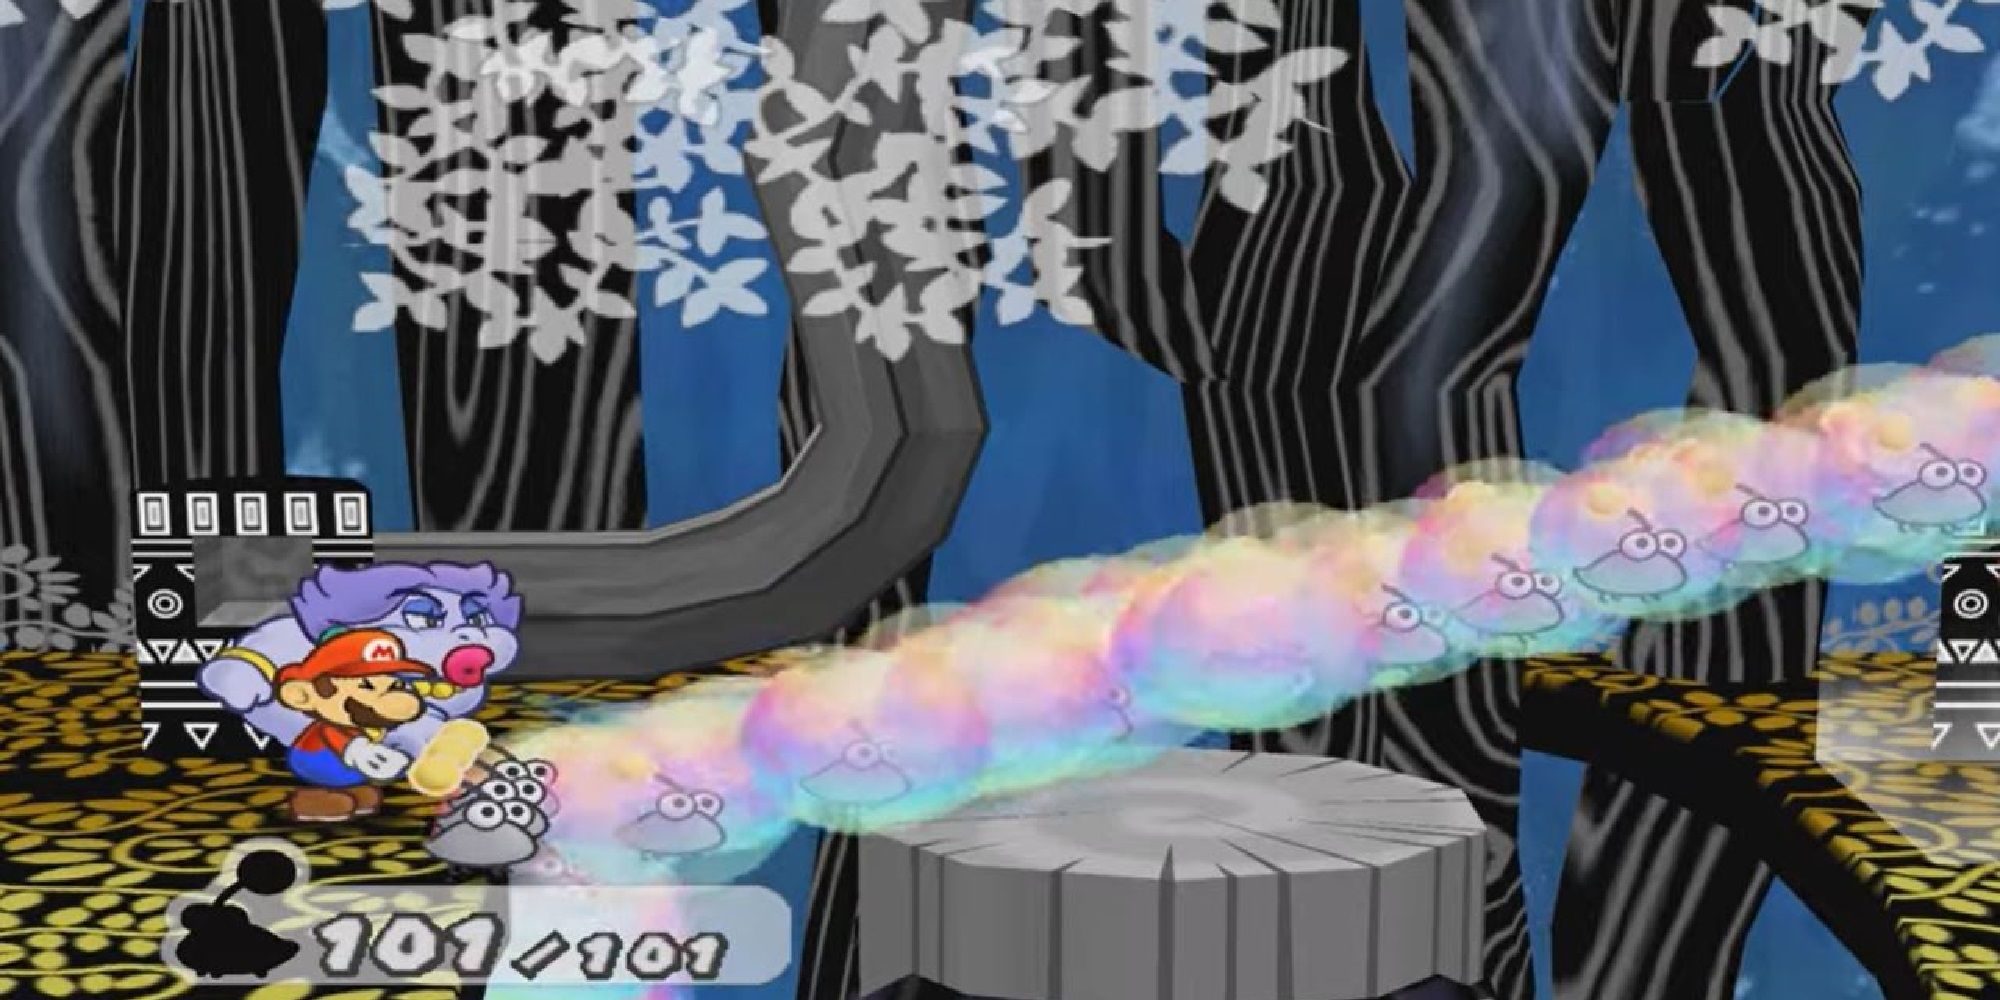 Flurrie uses her wind ability to blow Punies in bubbles a cross a gap.